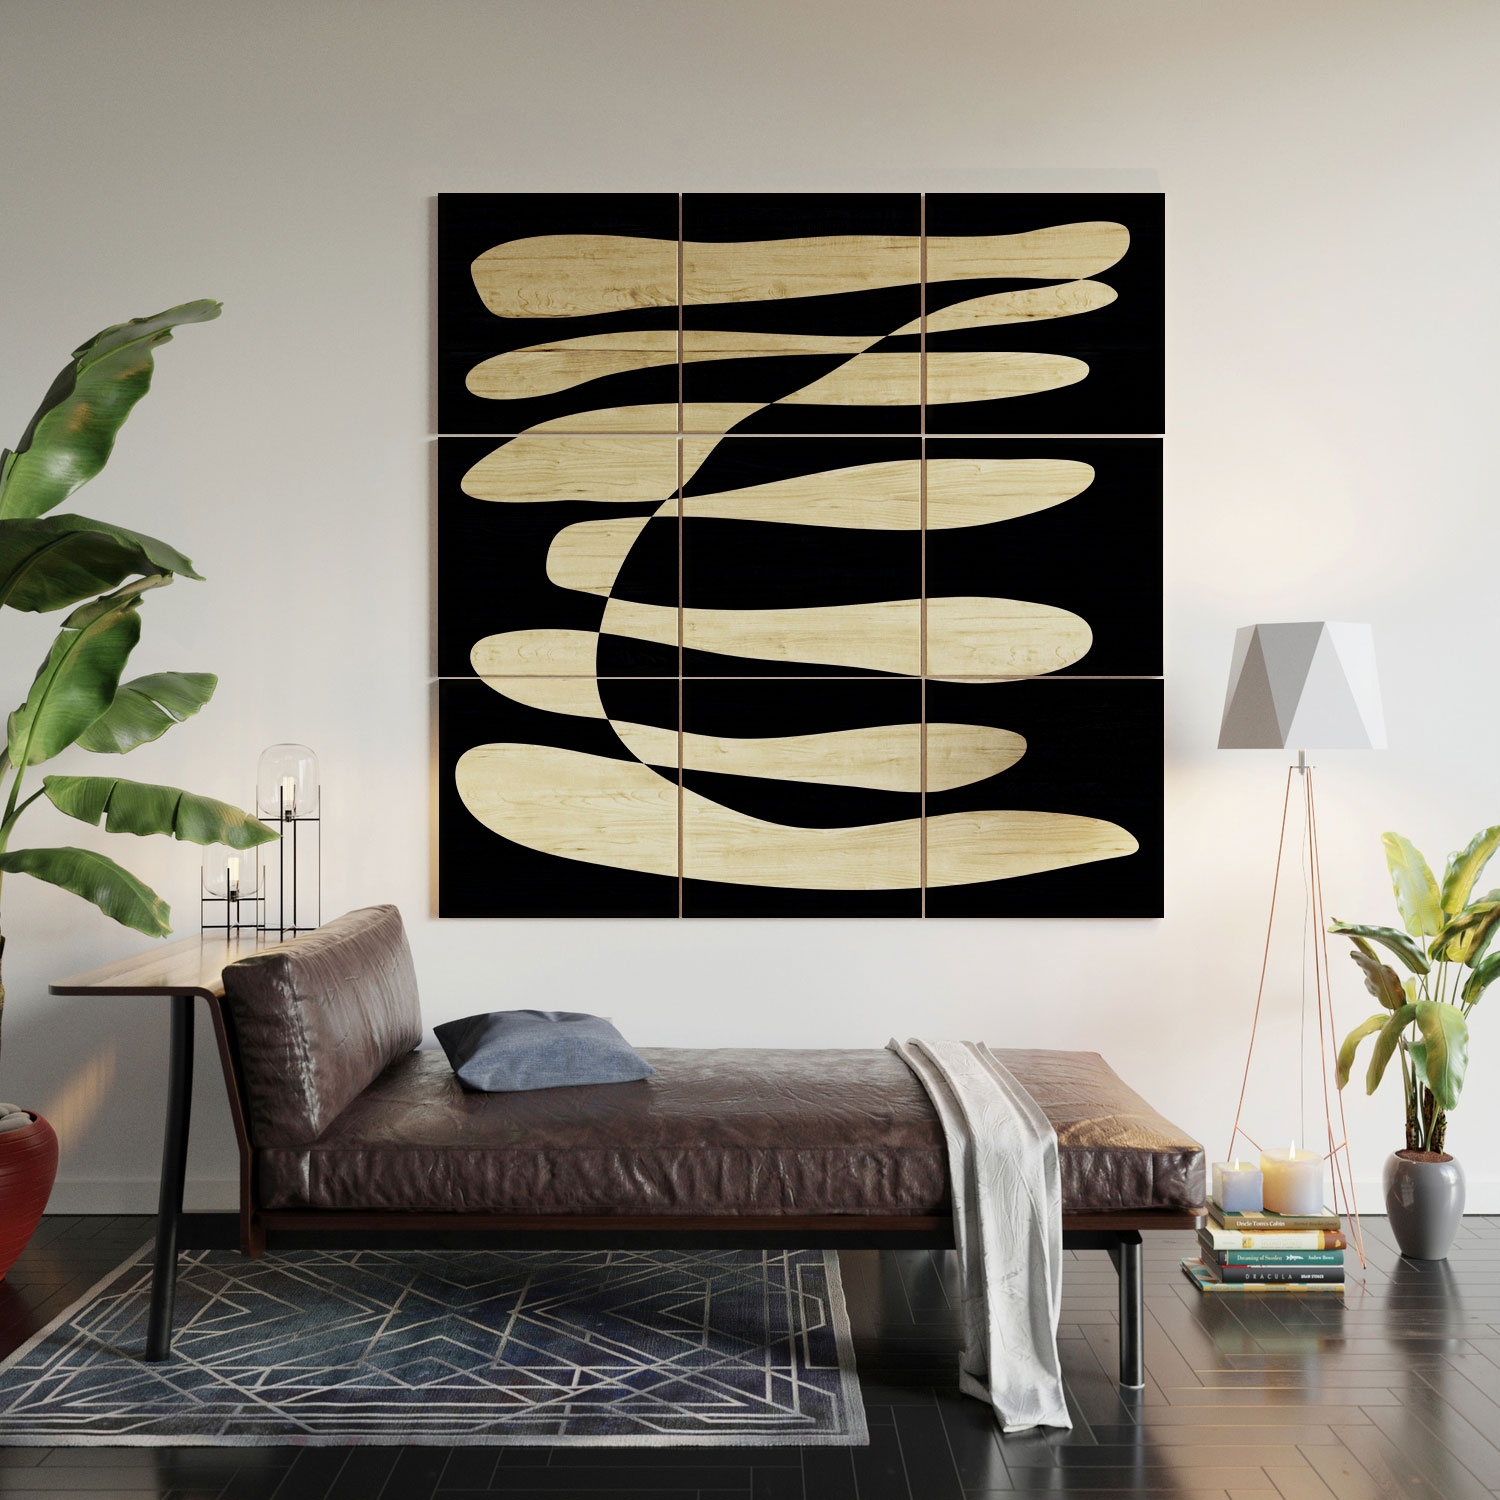 Abstract Composition In Black by June Journal - Wood Wall Mural3' X 3' (Nine 12" Wood Squares) - Image 4